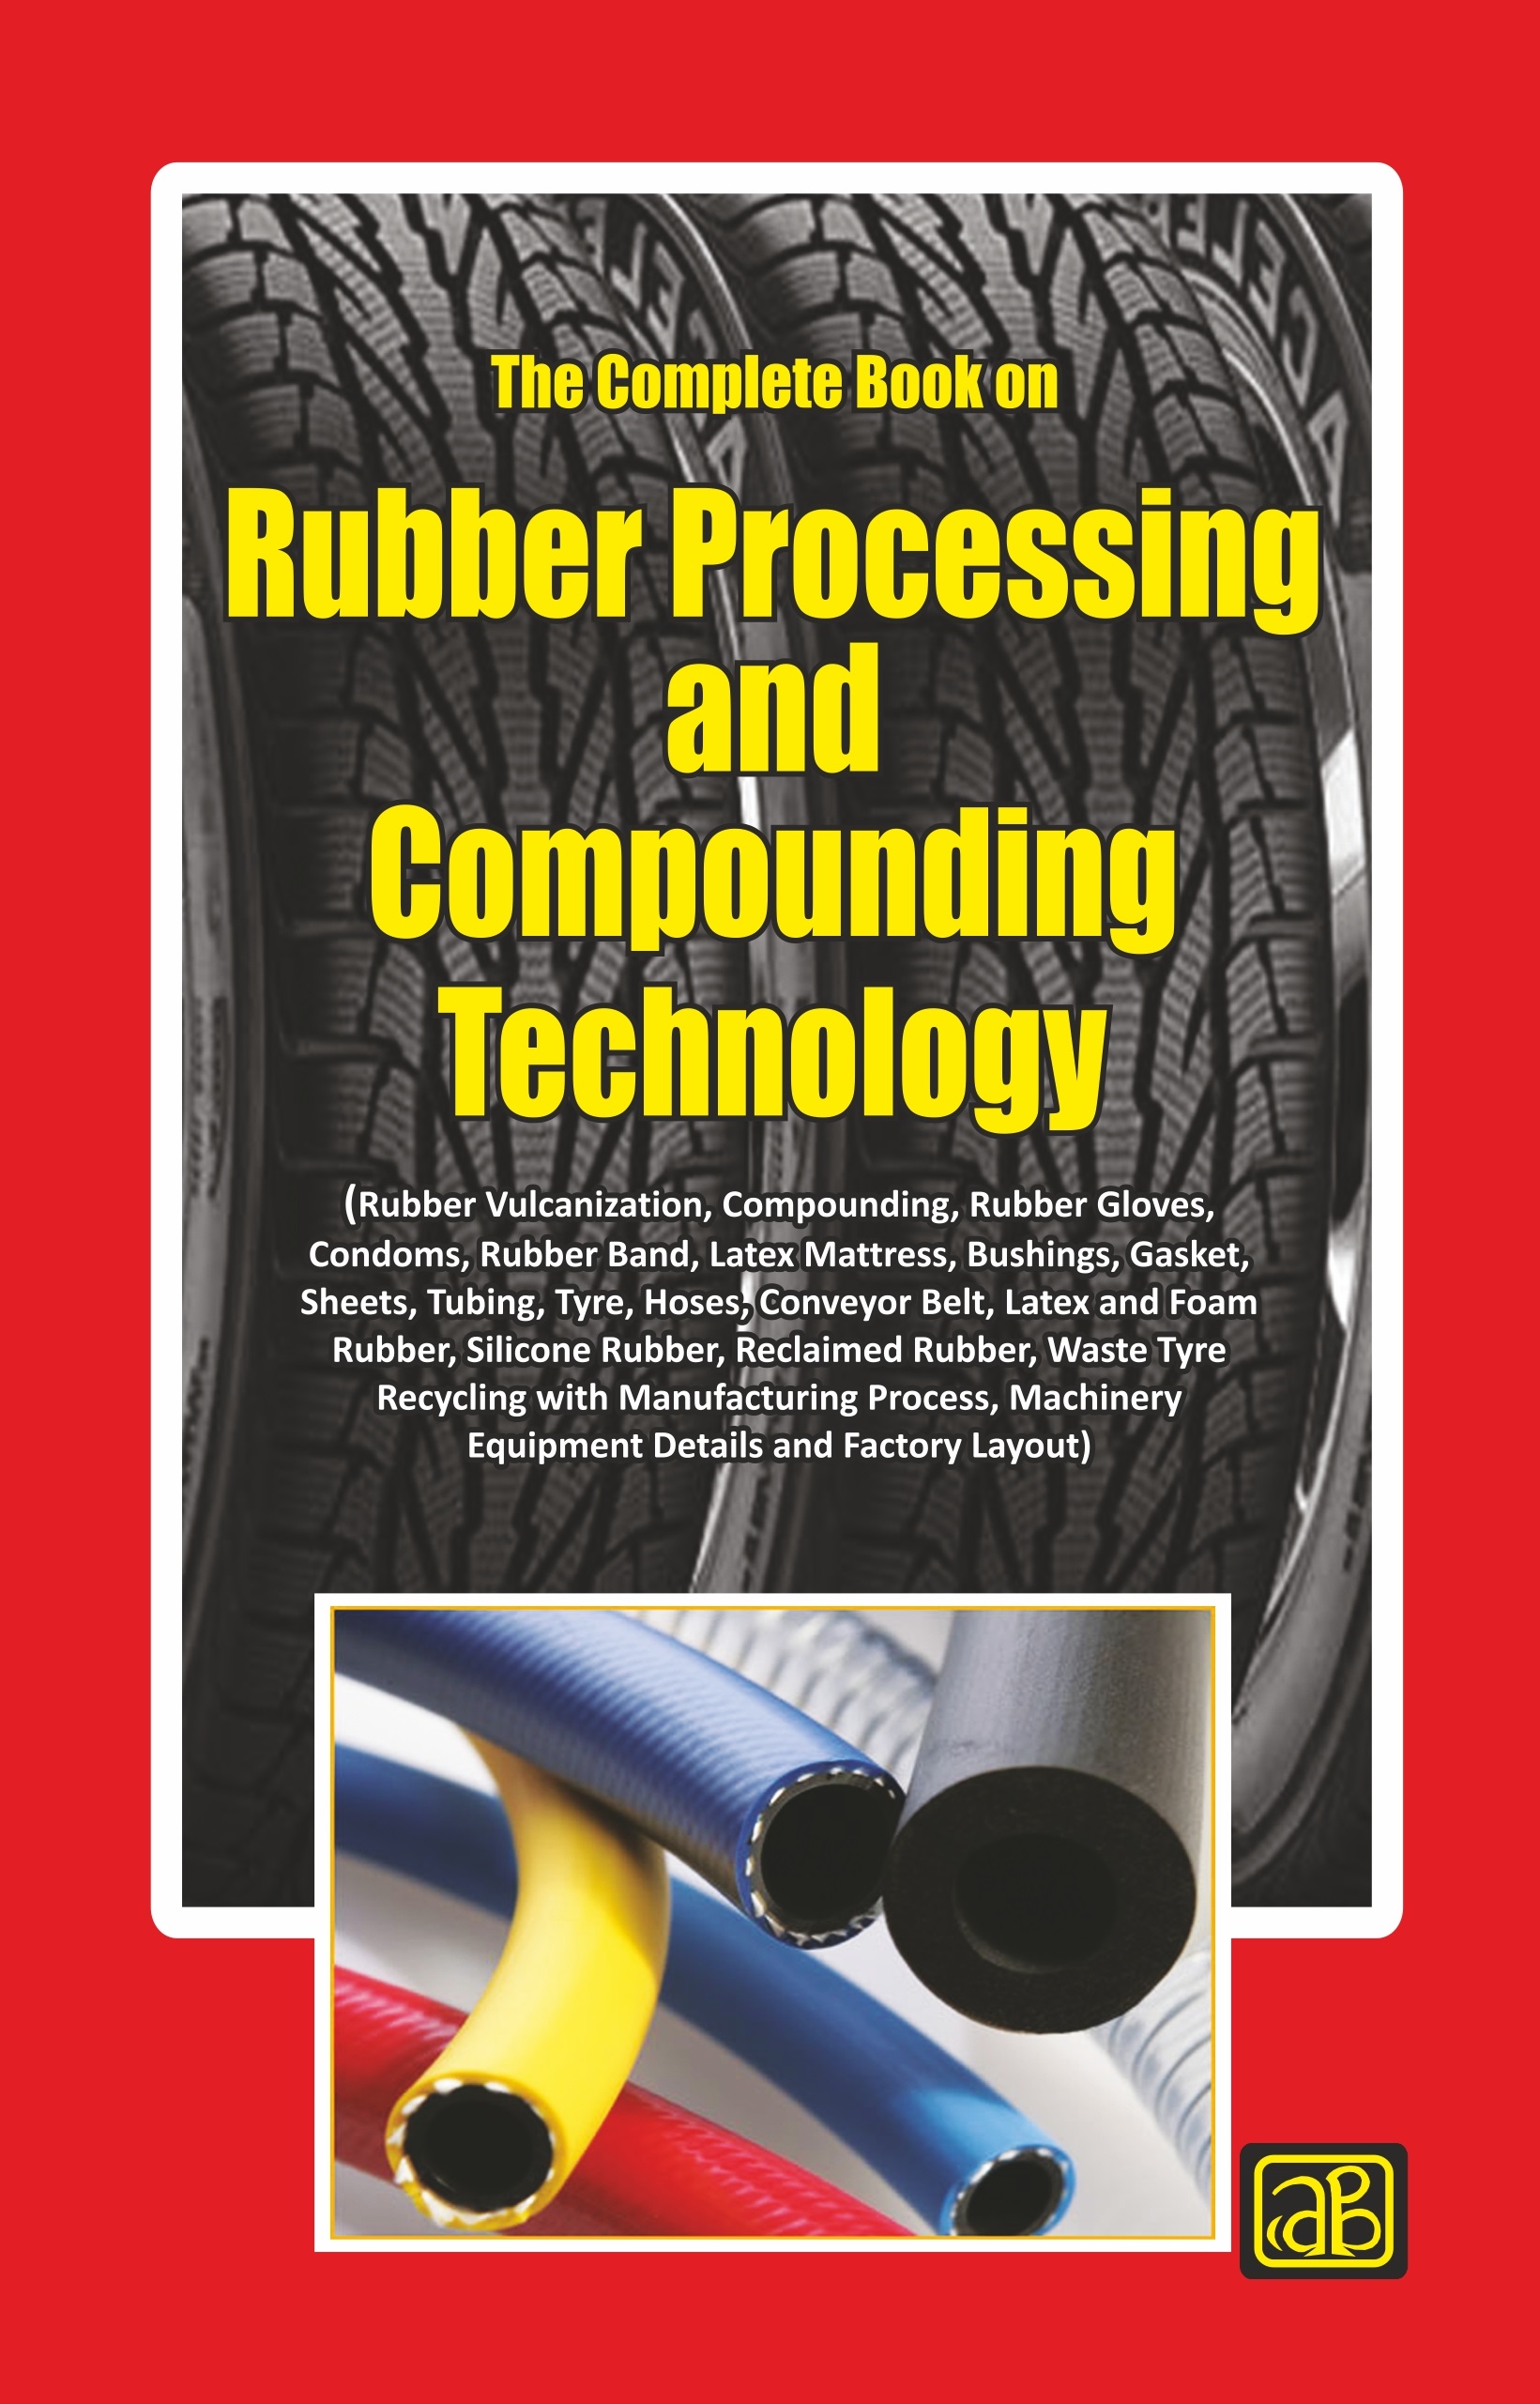 The Complete Book on Rubber Processing and Compounding Technology (Rubber Vulcanization, Compounding, Rubber Gloves, Condoms, Rubber Band, Latex Mattress, Bushings, Gasket, Sheets, Tubing, Tyre, Hoses, Conveyor Belt, Latex and Foam Rubber, Silicone Rubber, Reclaimed Rubber, Waste Tyre Recycling with Manufacturing Process, Machinery Equipment Details and Factory Layout) 3rd Revised Edition